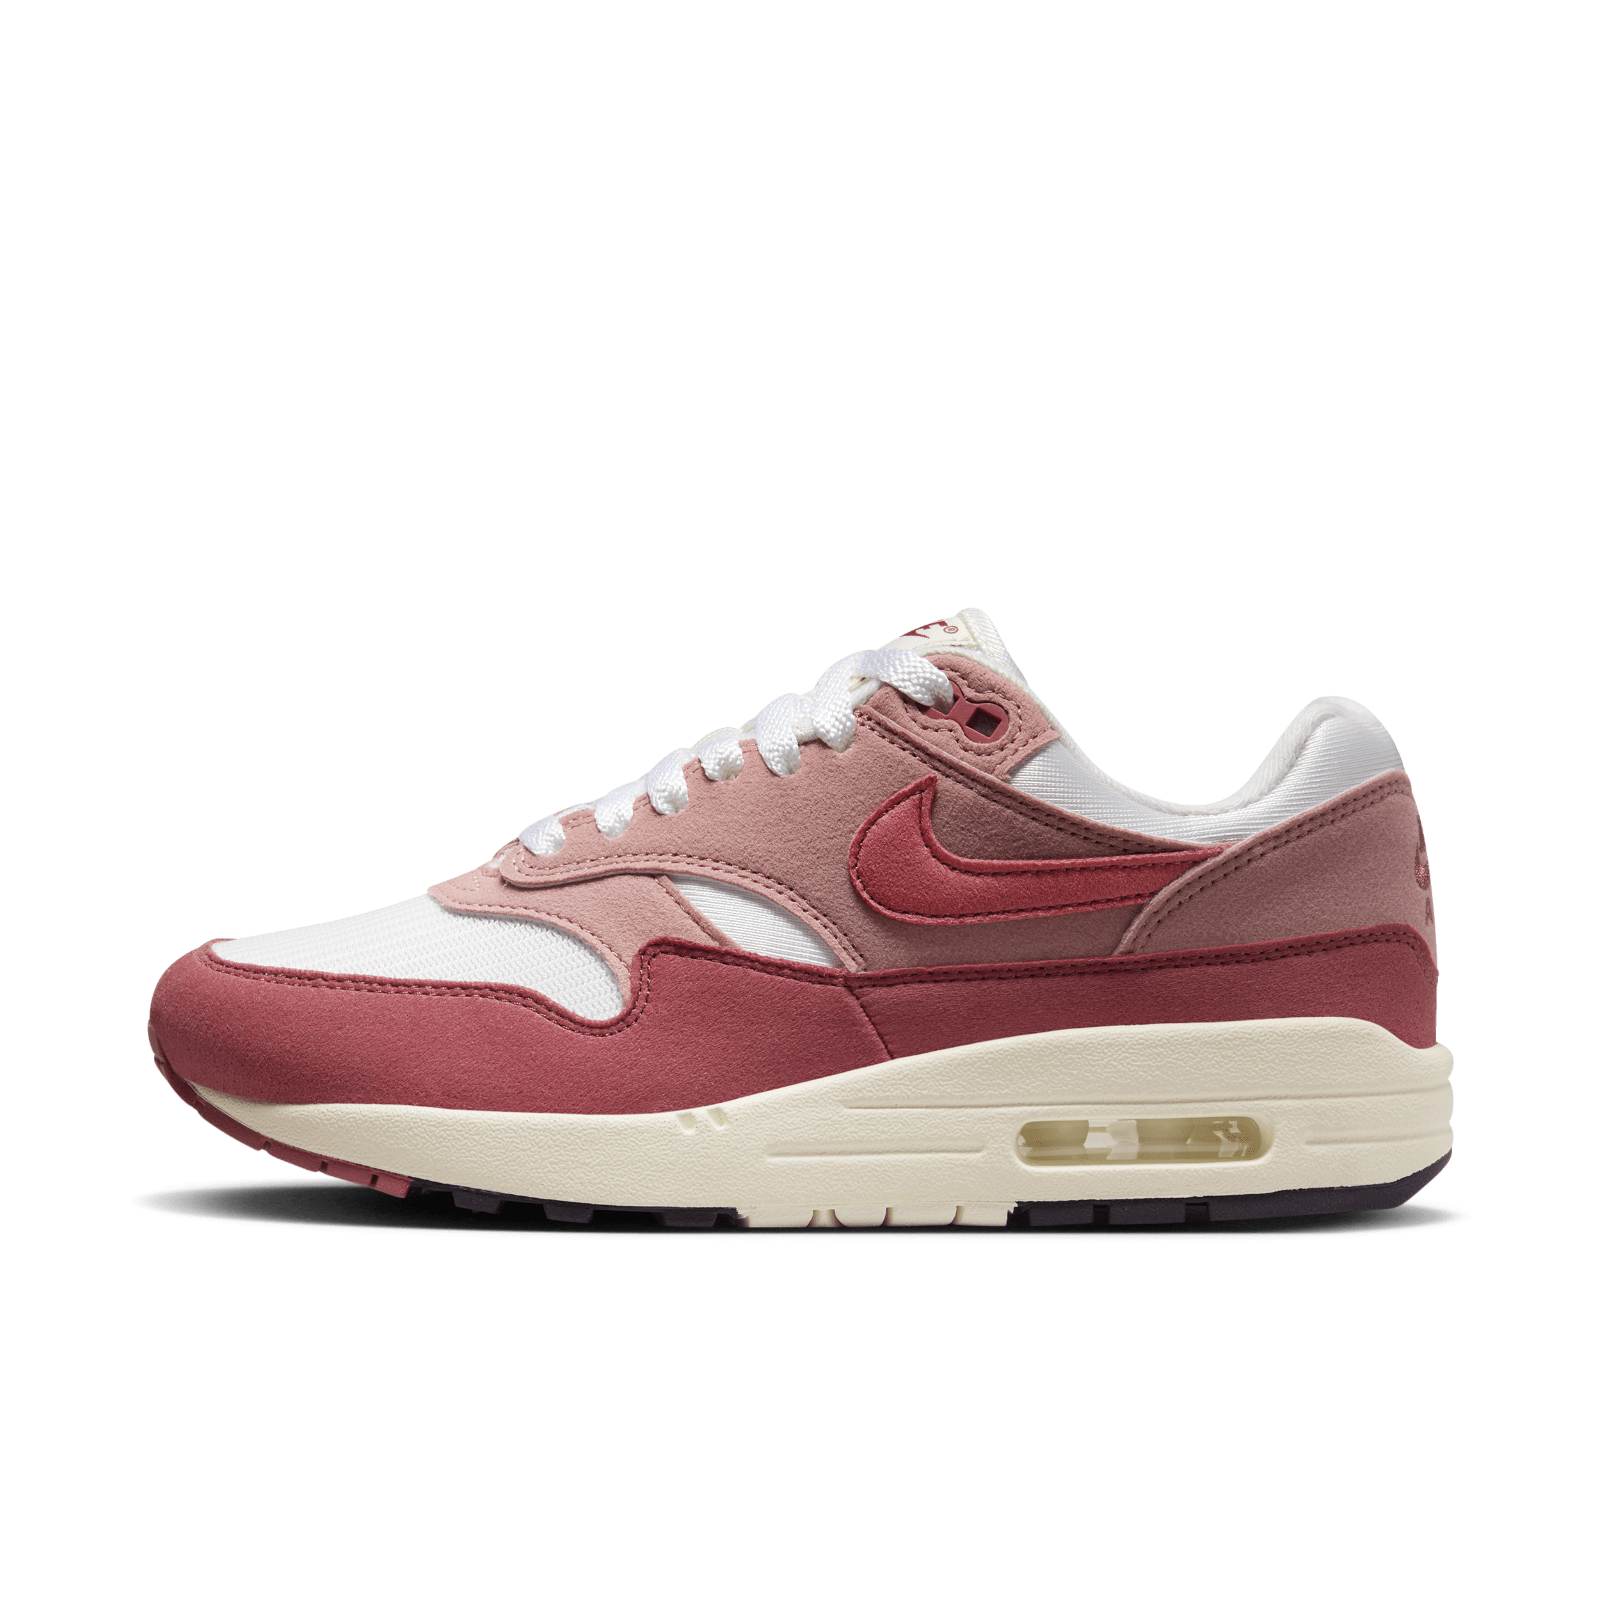 Air Max 1 "Red Stardust" W